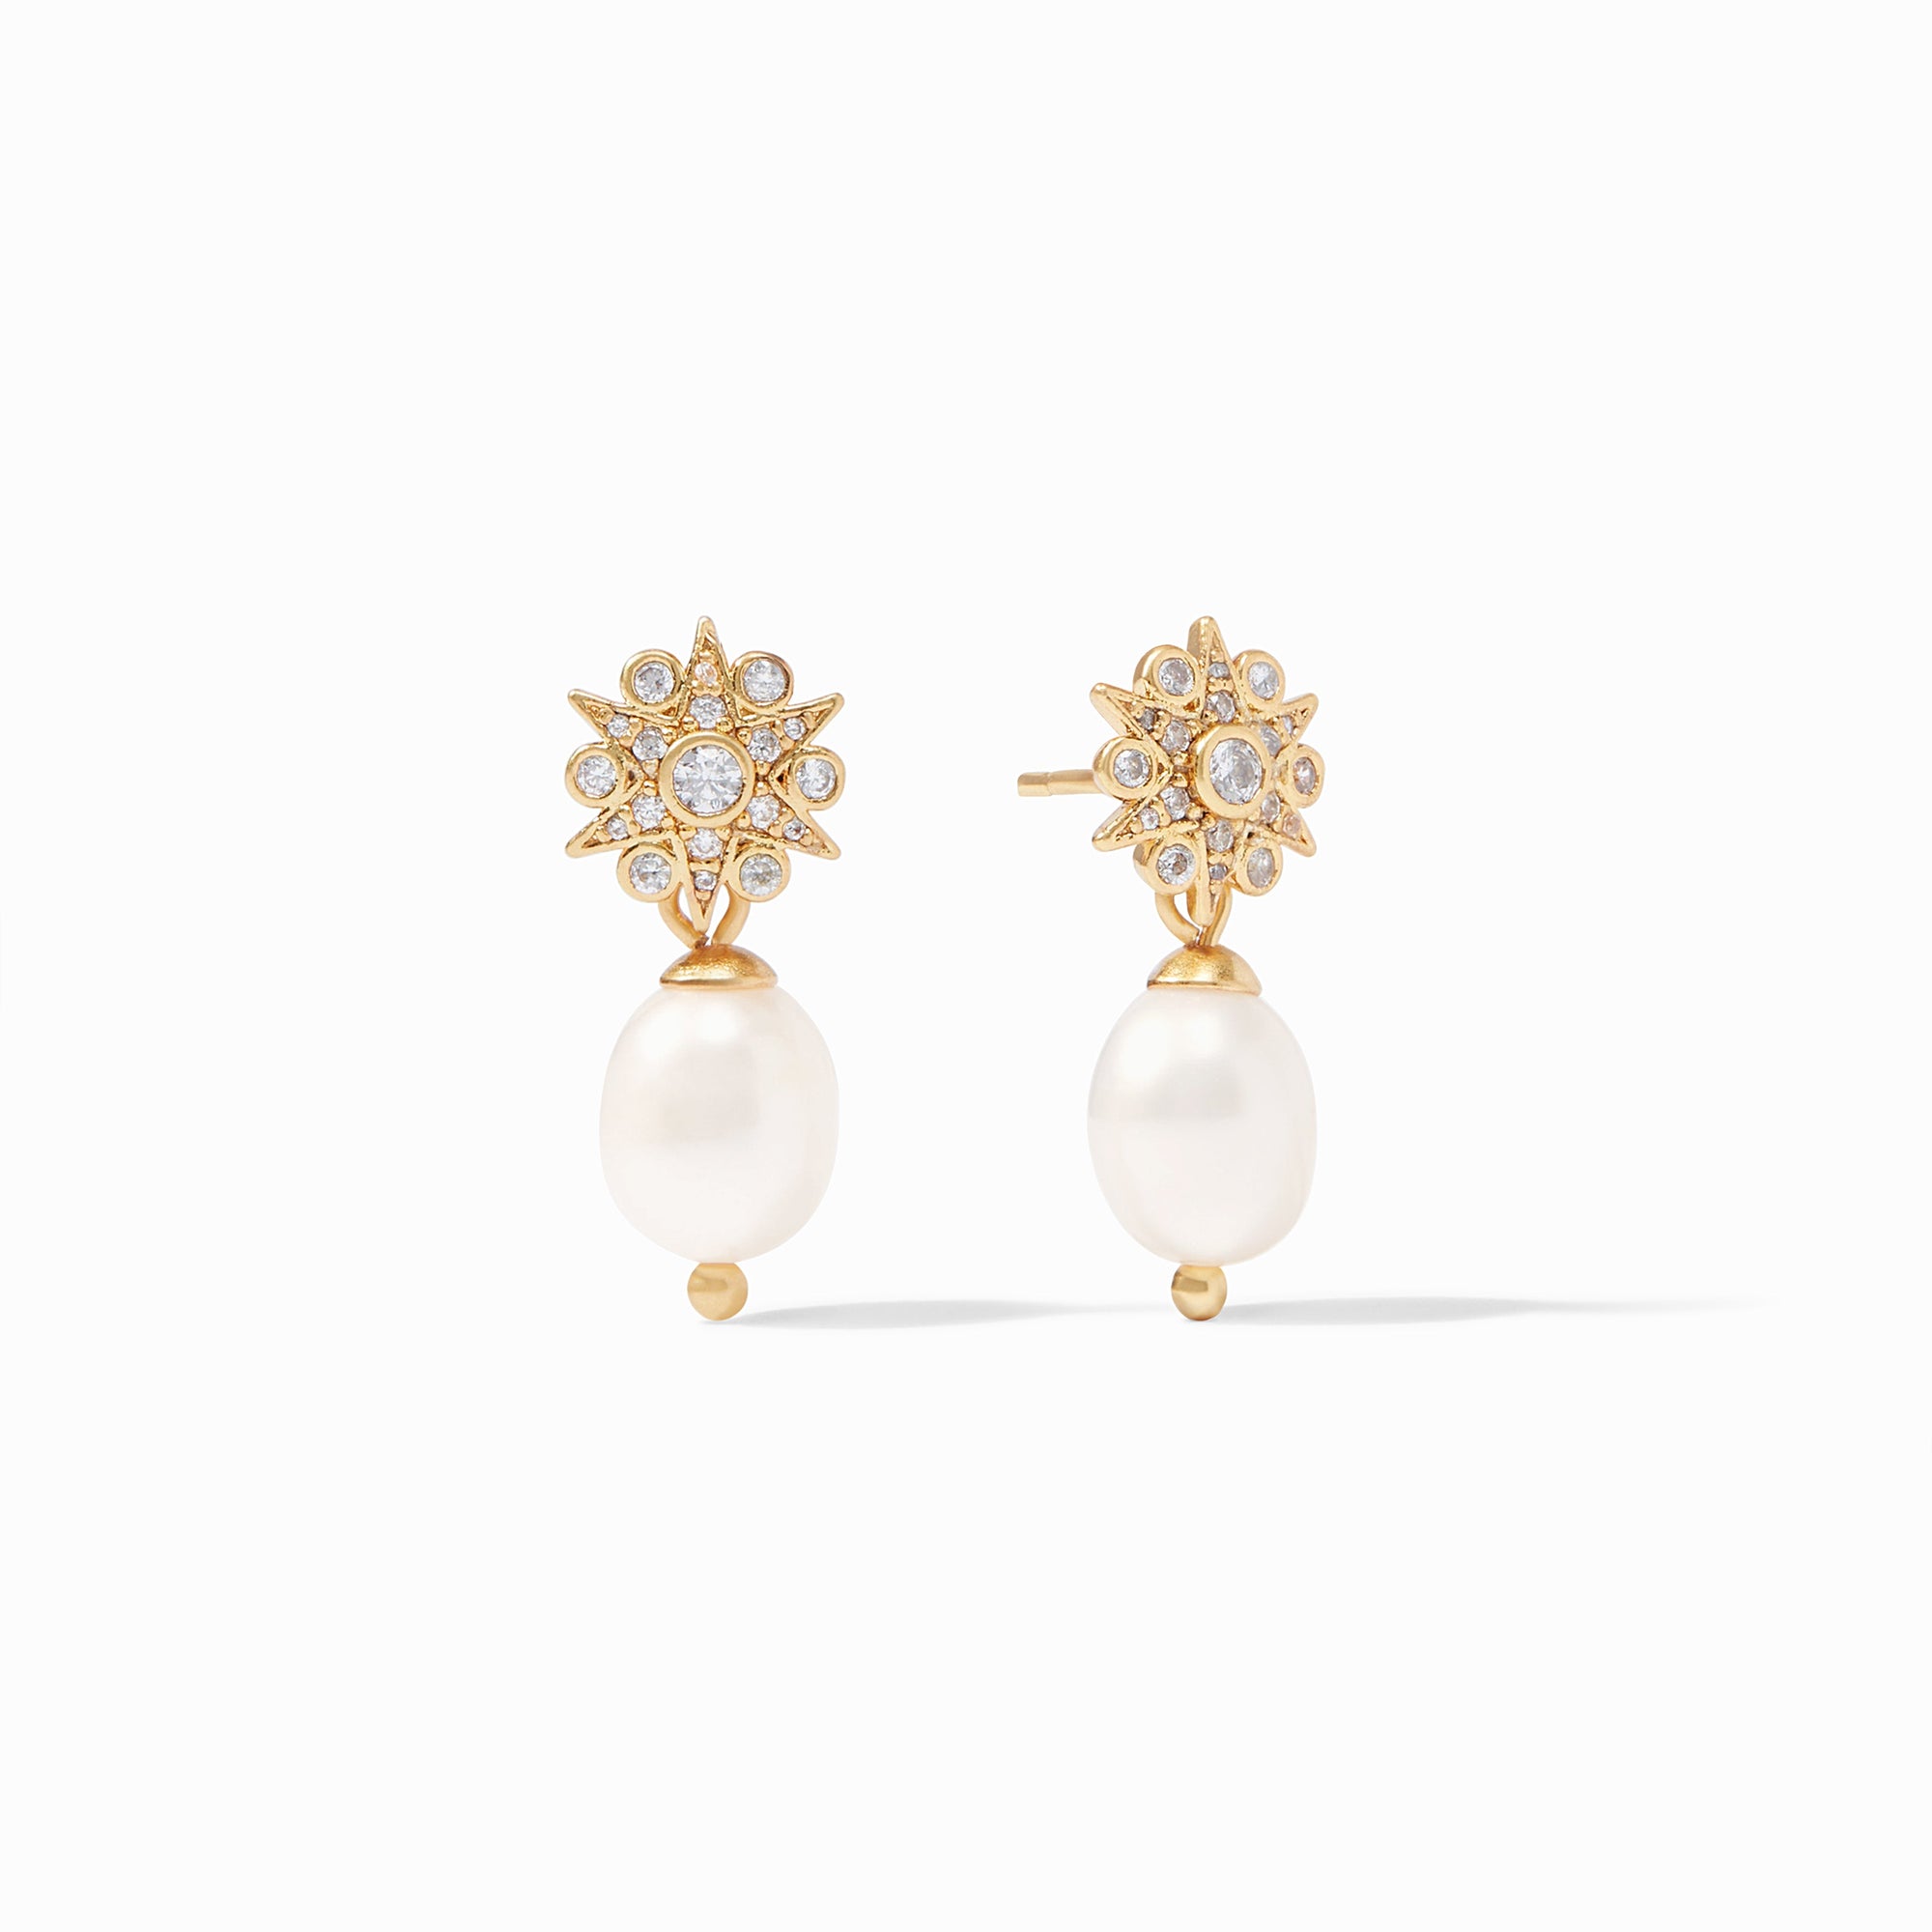 Alice - Crystal pearls tapered cascading crystal clear stud